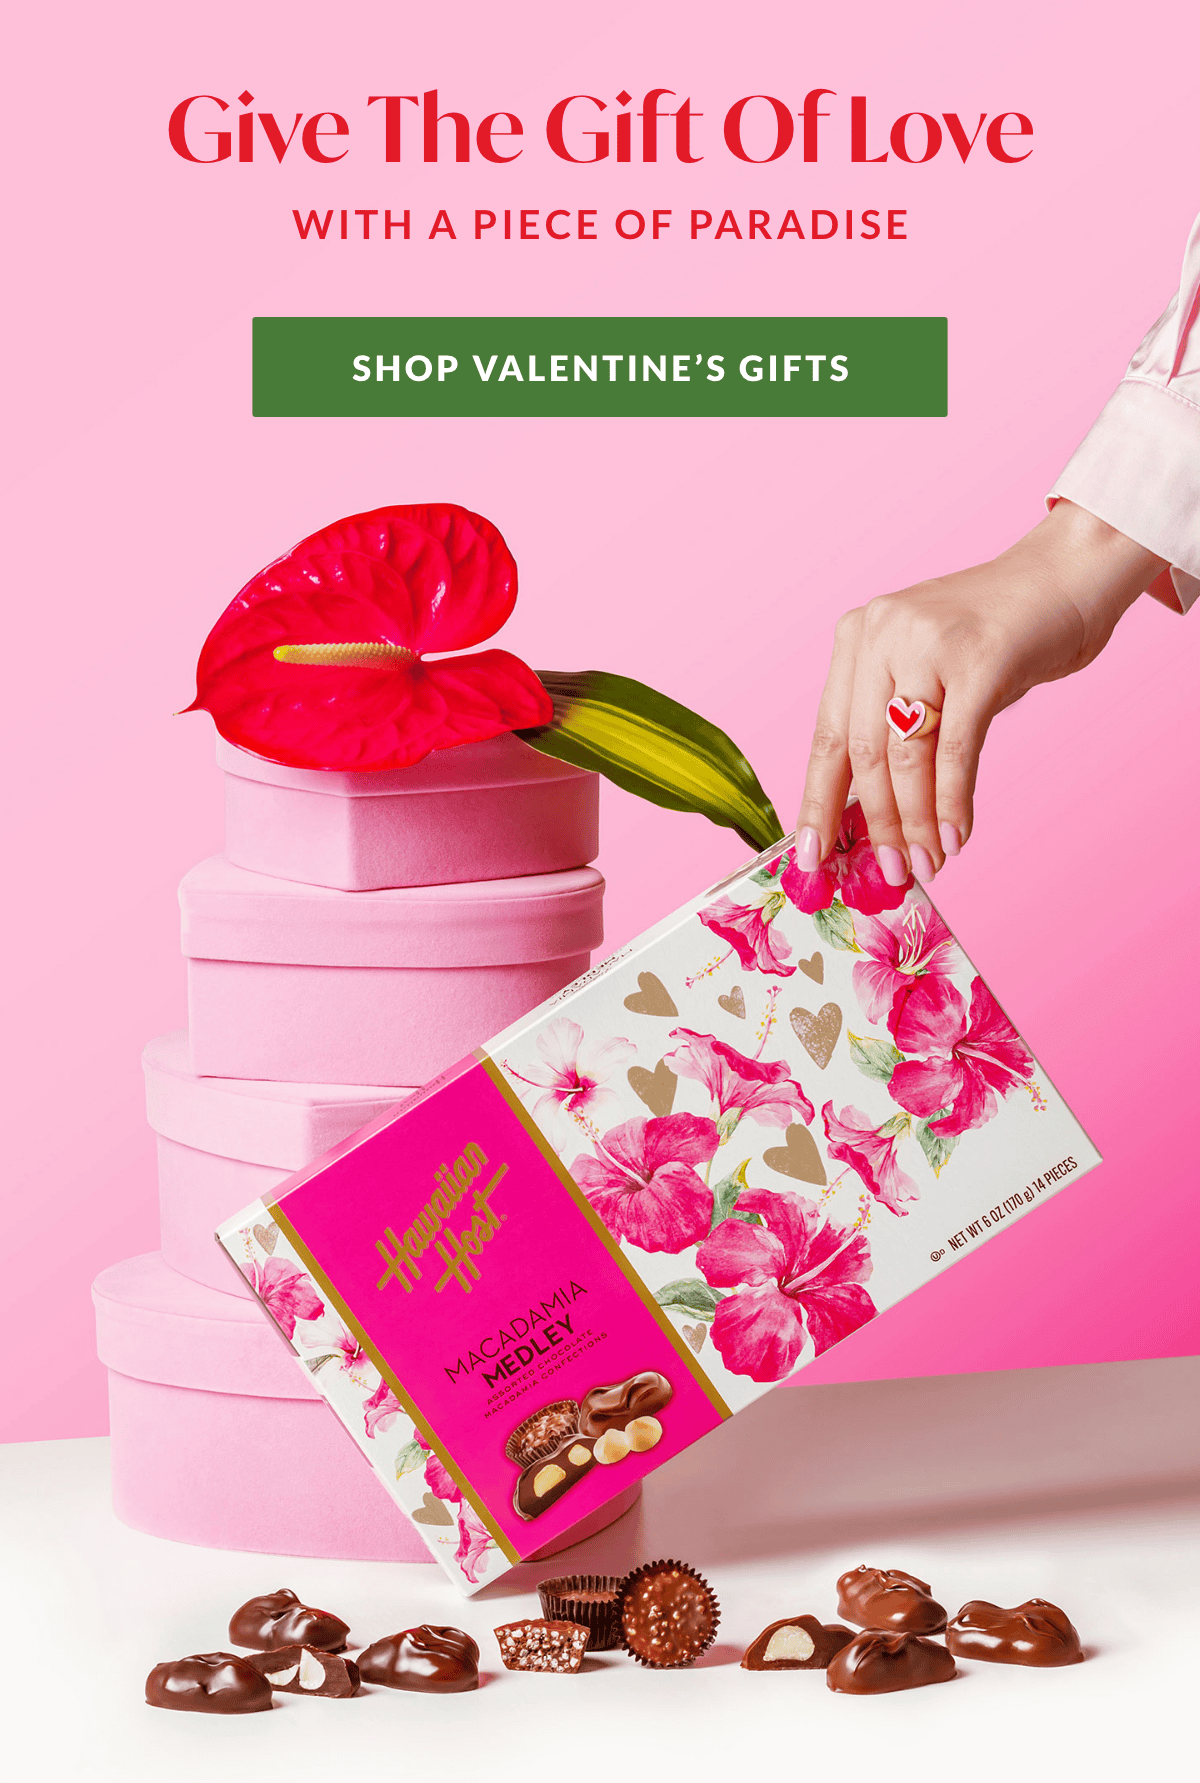 Give the gift of love. Shop Valentine's Gifts.